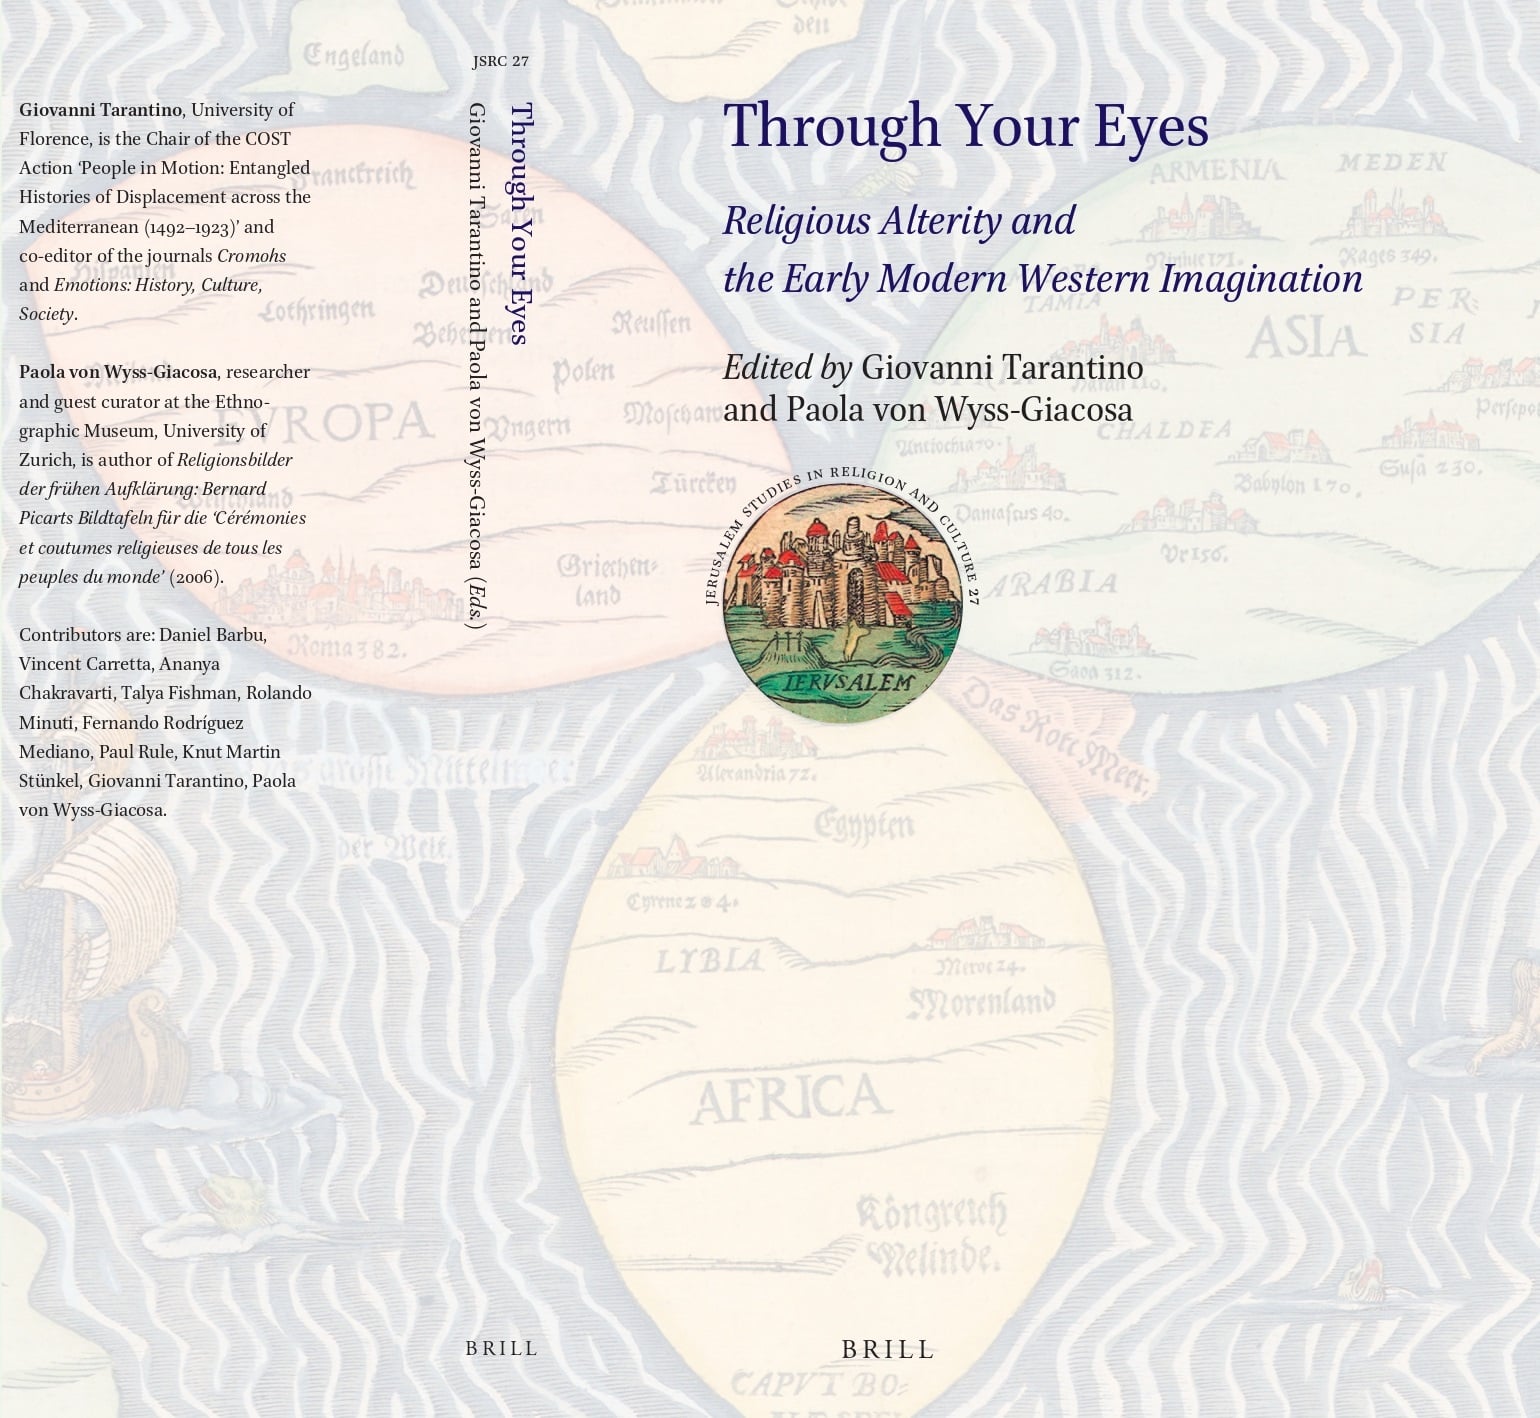 Through Your Eyes: Religious Alterity and the Early Modern Western Imagination, edited by Giovanni Tarantino and Paola von Wyss-Giacosa, (Leiden: Brill, 2021)